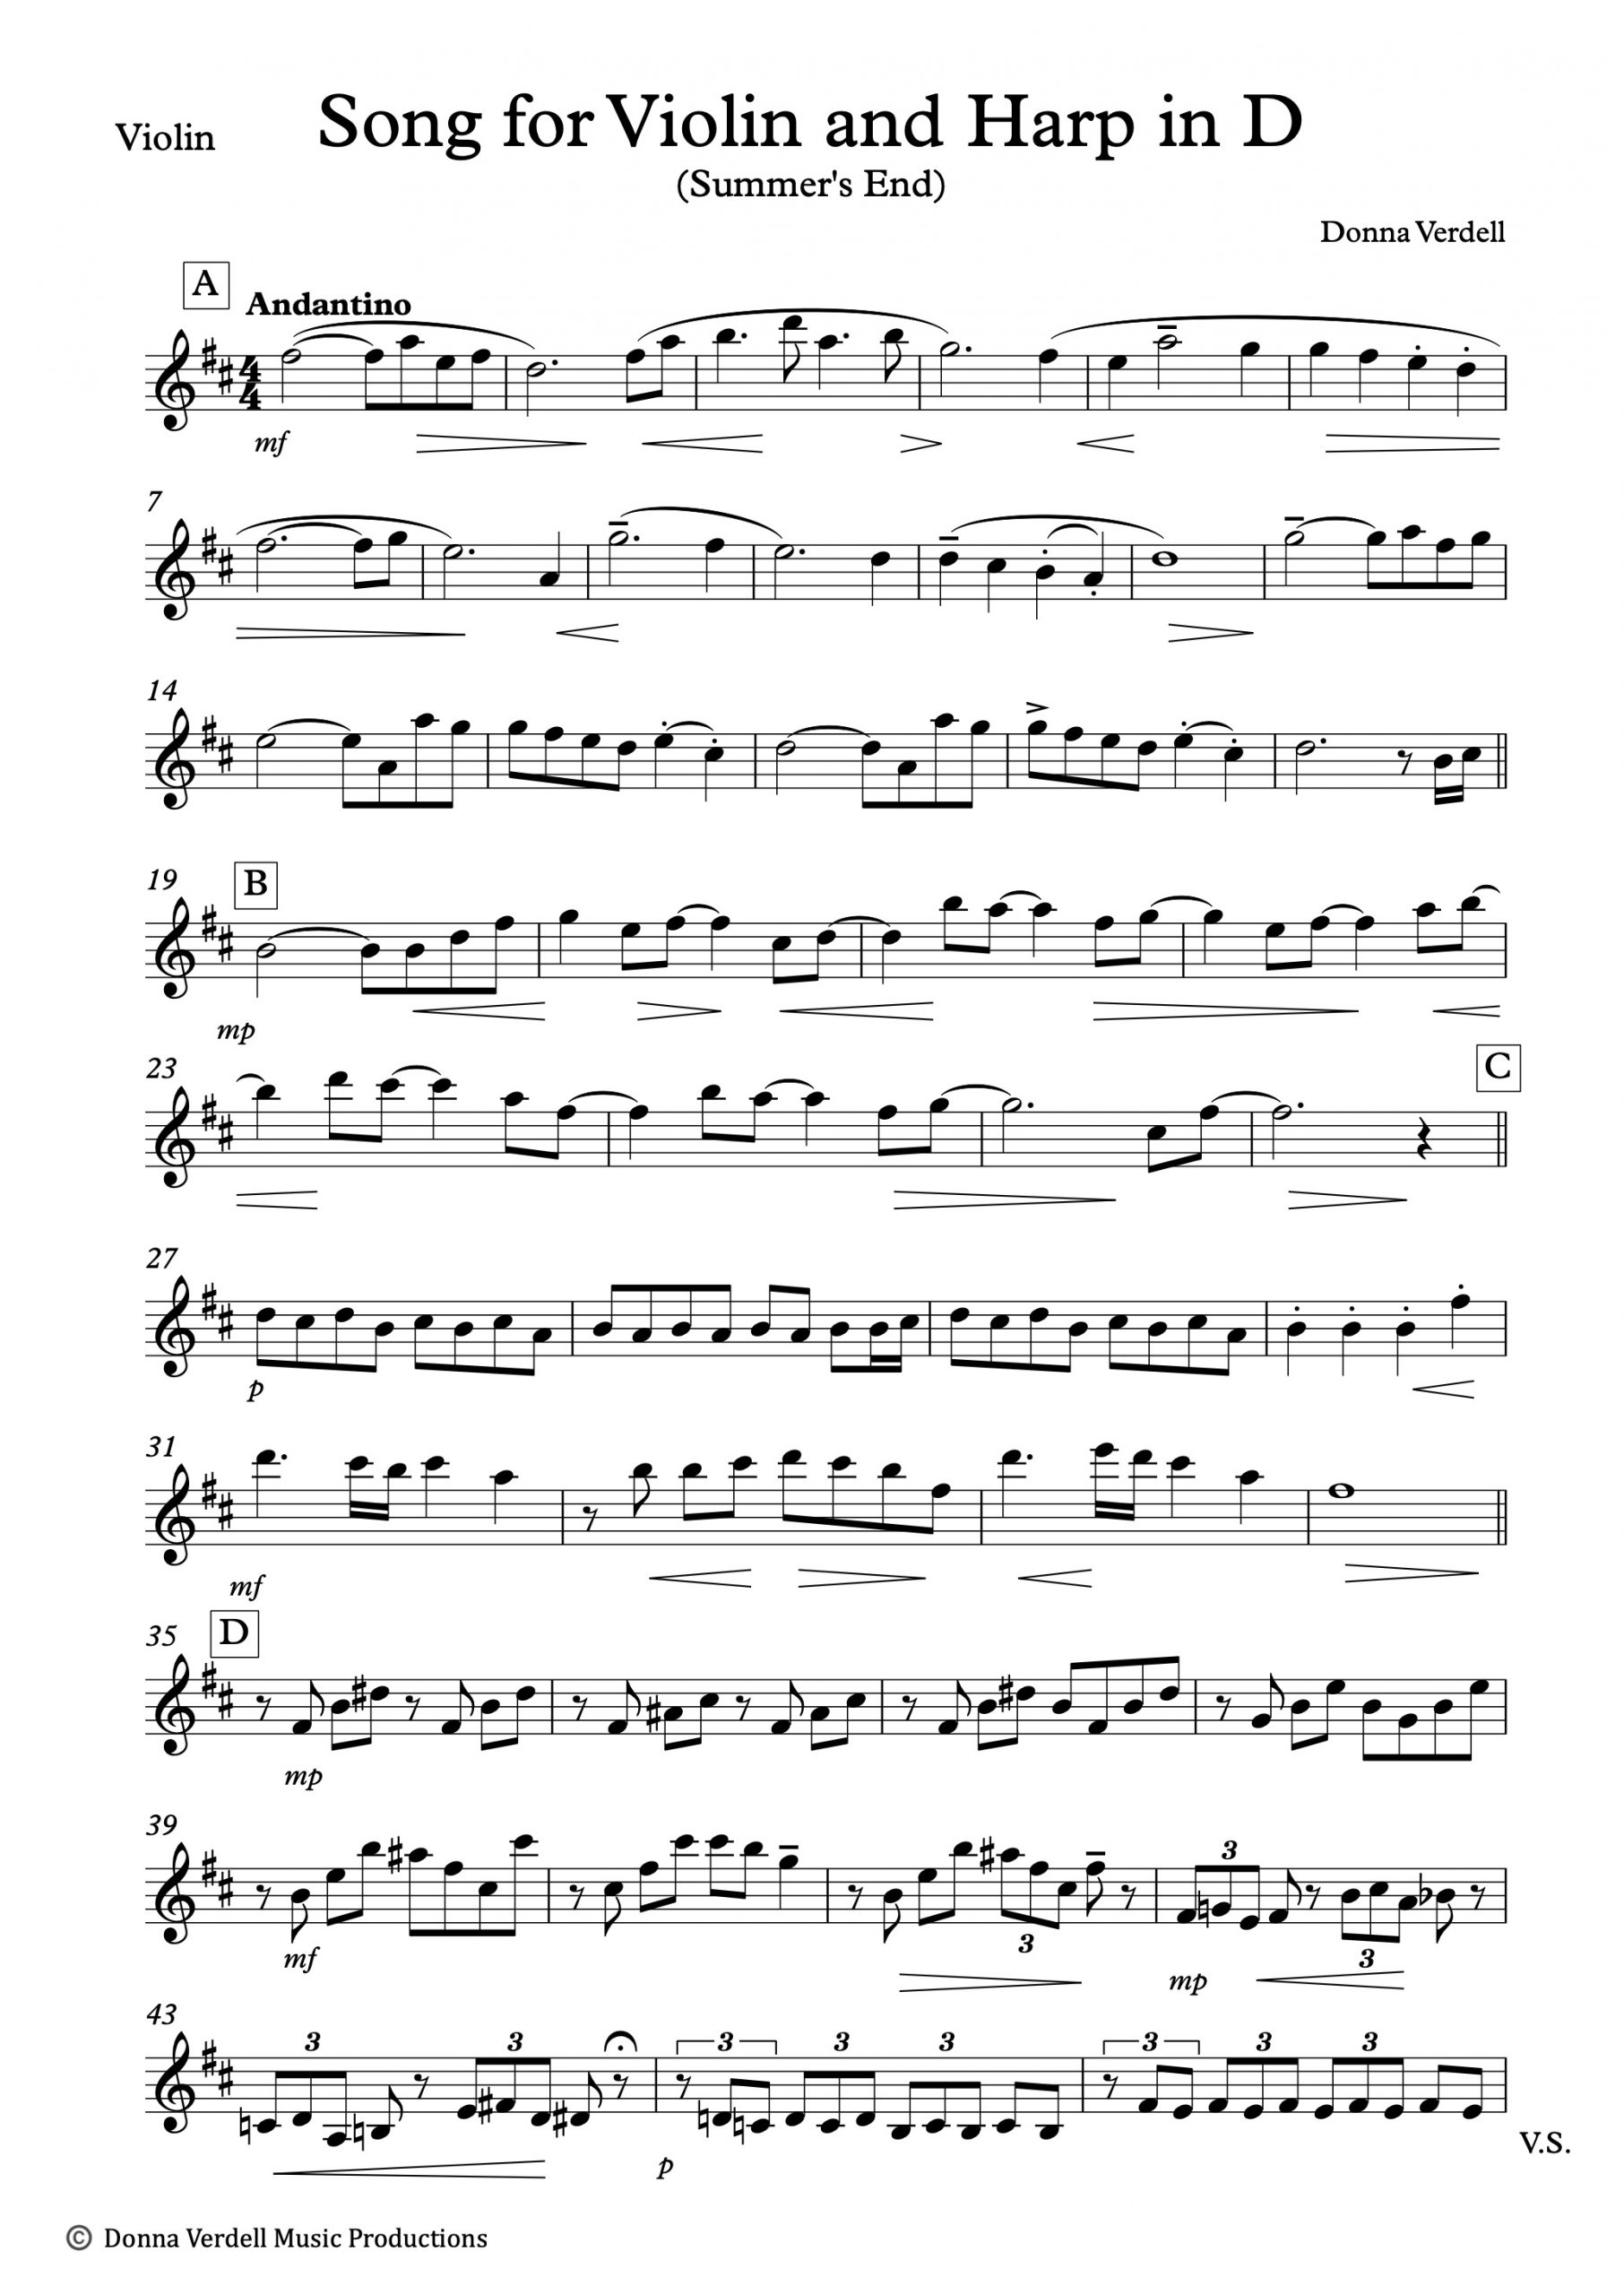 Song for Violin and Harp in D (Summer's End) VIOLIN PAGINA 1- Donna Verdell VIOLIN kopie